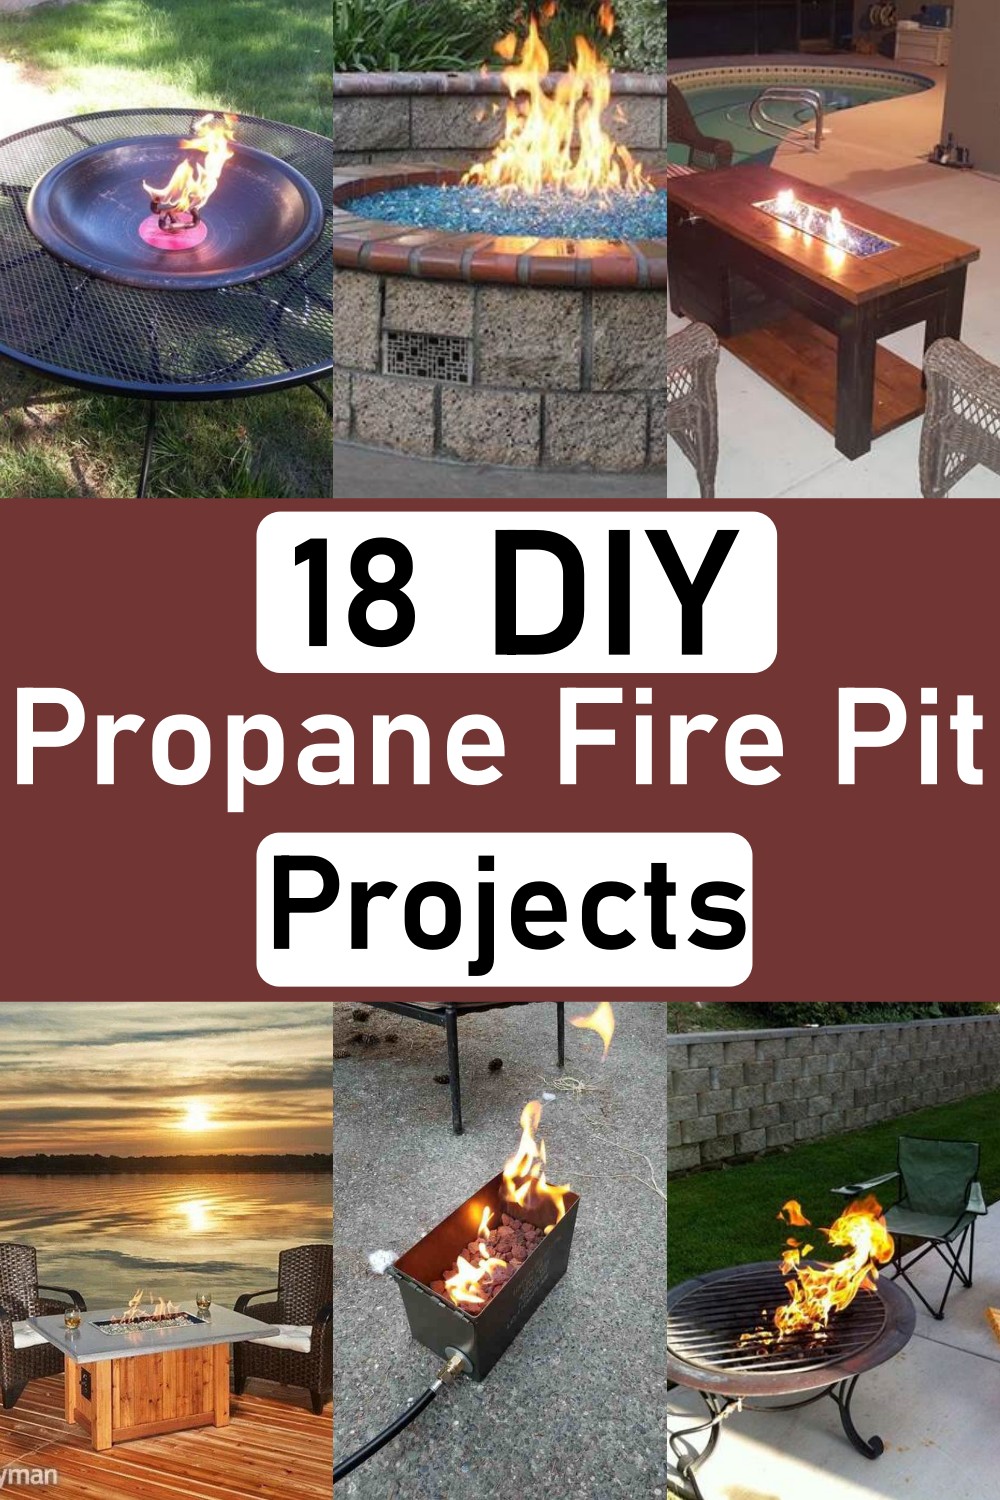 Propane Fire Pit Projects